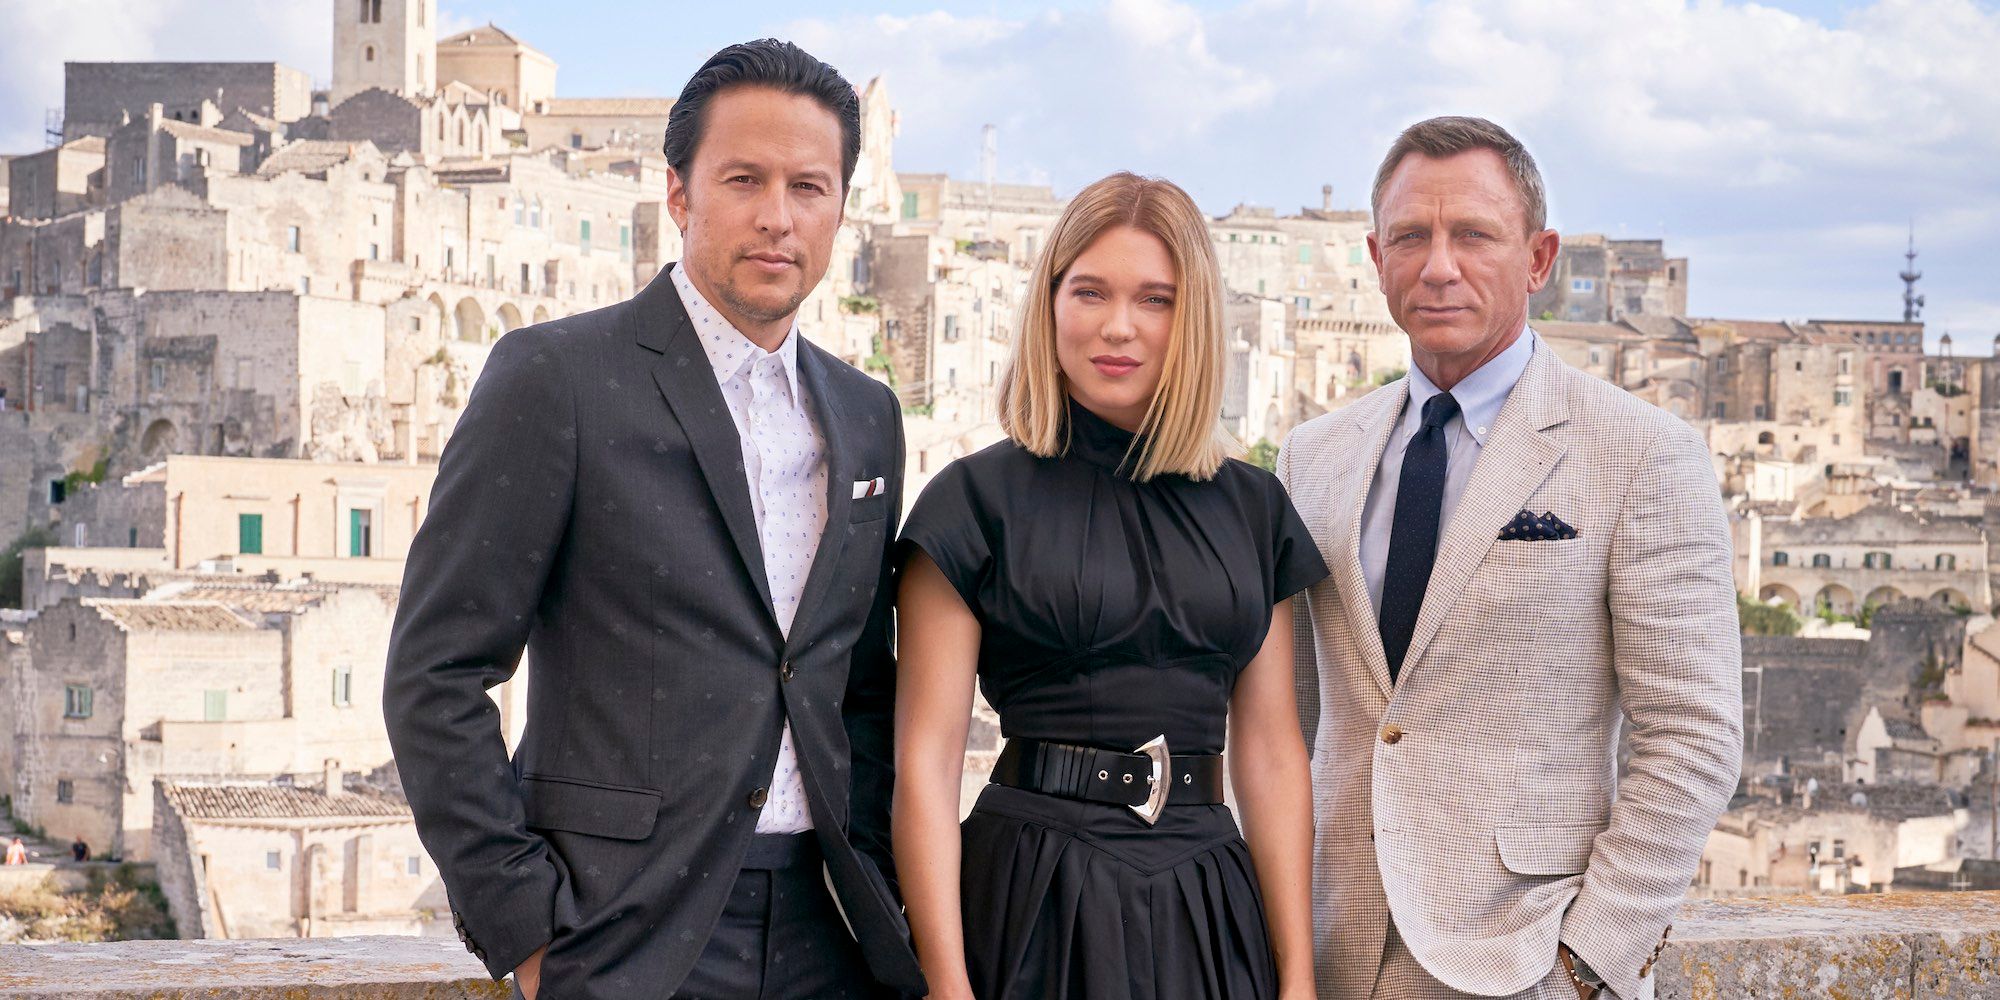 Cary Fukunaga, Lea Seydoux and Daniel Craig in Matera, Italy for new James Bond movie, No Time To Die